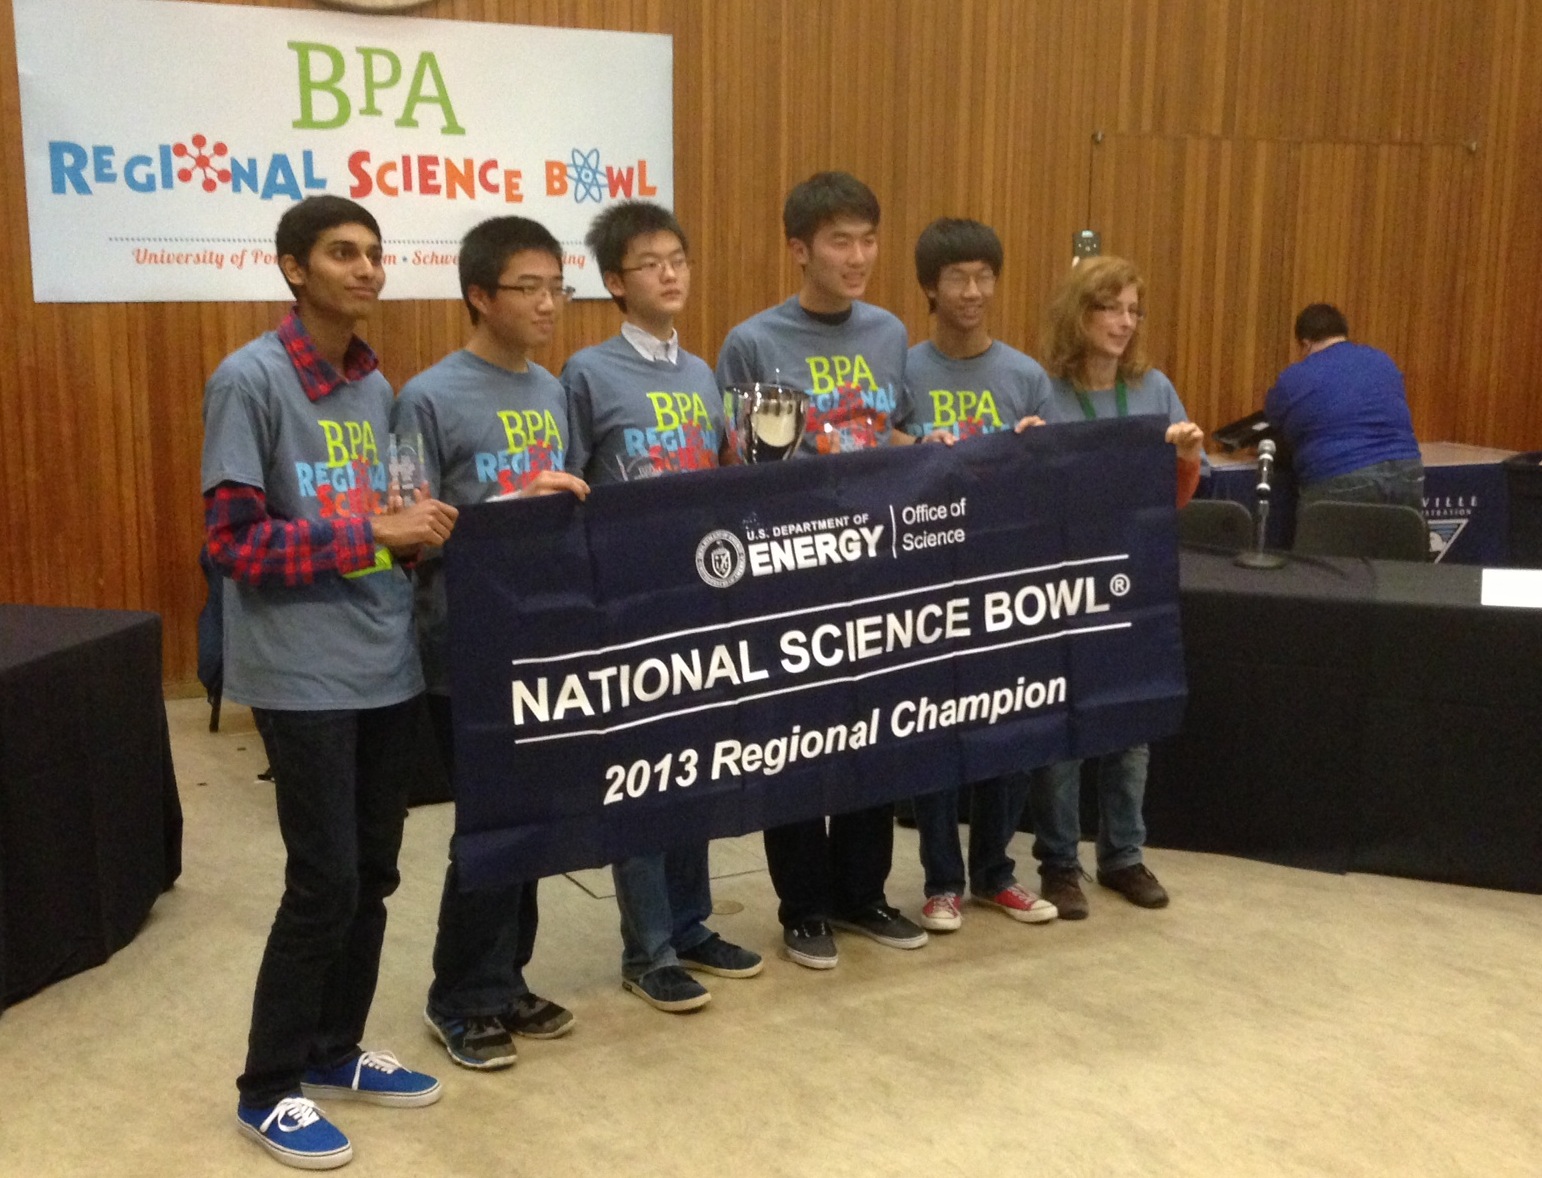 A team from Mountain View High School in Vancouver finished in first place Saturday at the high school division of the BPA Regional Science Bowl 2013. It was the second year in a row the team has won the competition.